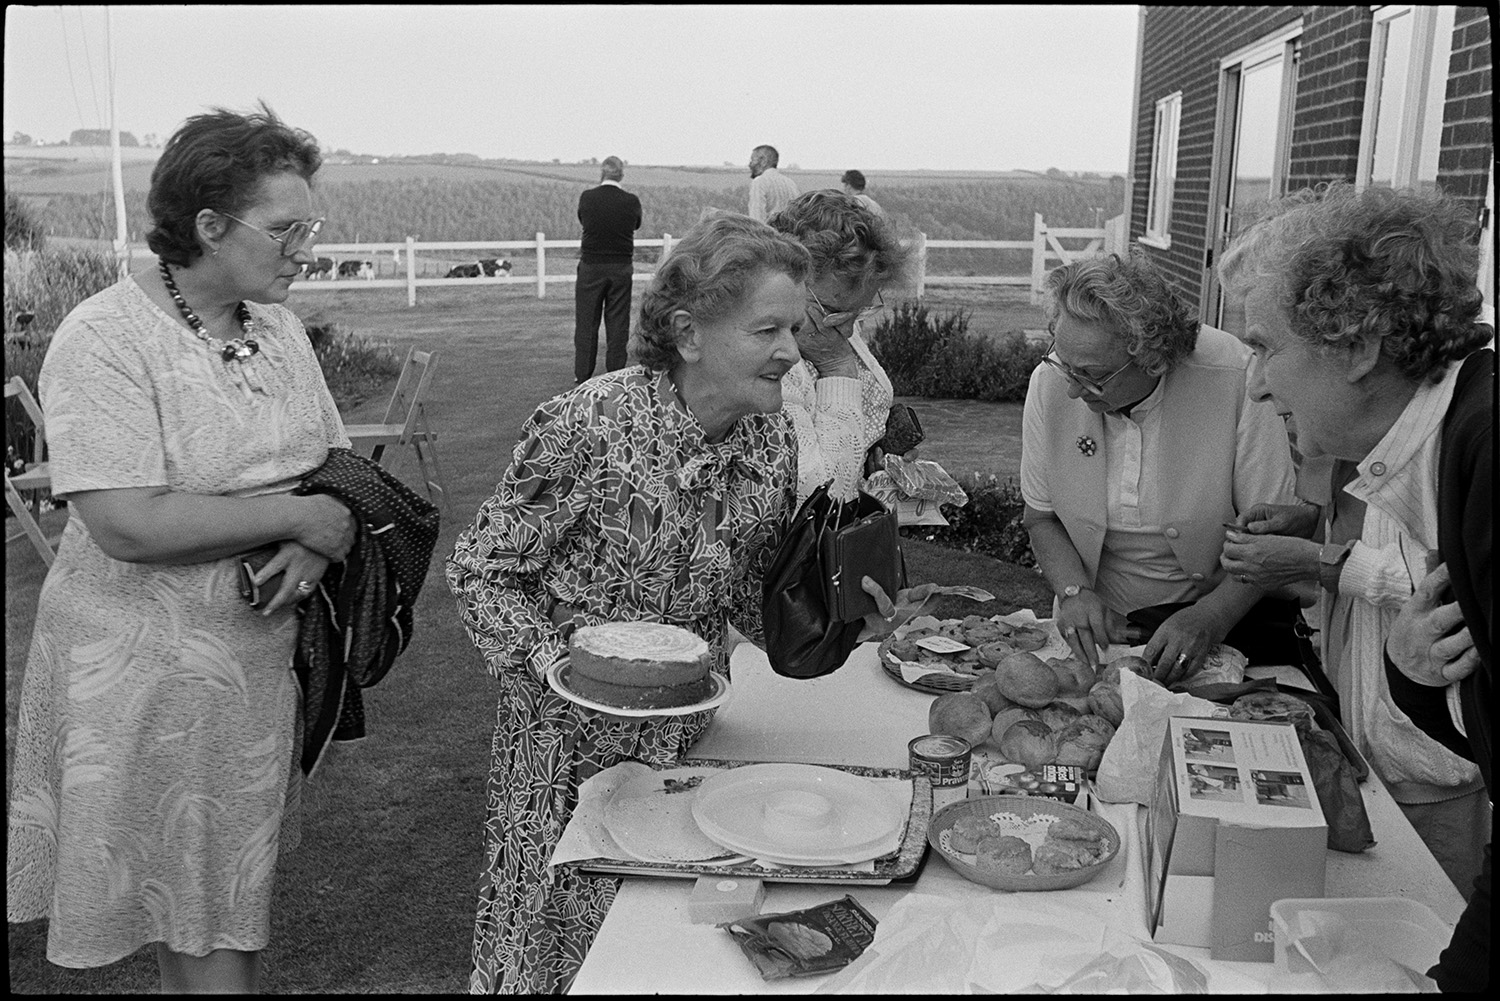 Garden fete, people having tea cake stall. 
[Women buying cakes from a cake stall at a fete at Cricket Close, Chulmleigh. Three men are watching a cricket match and cows grazing over a wooden fence in the background.]